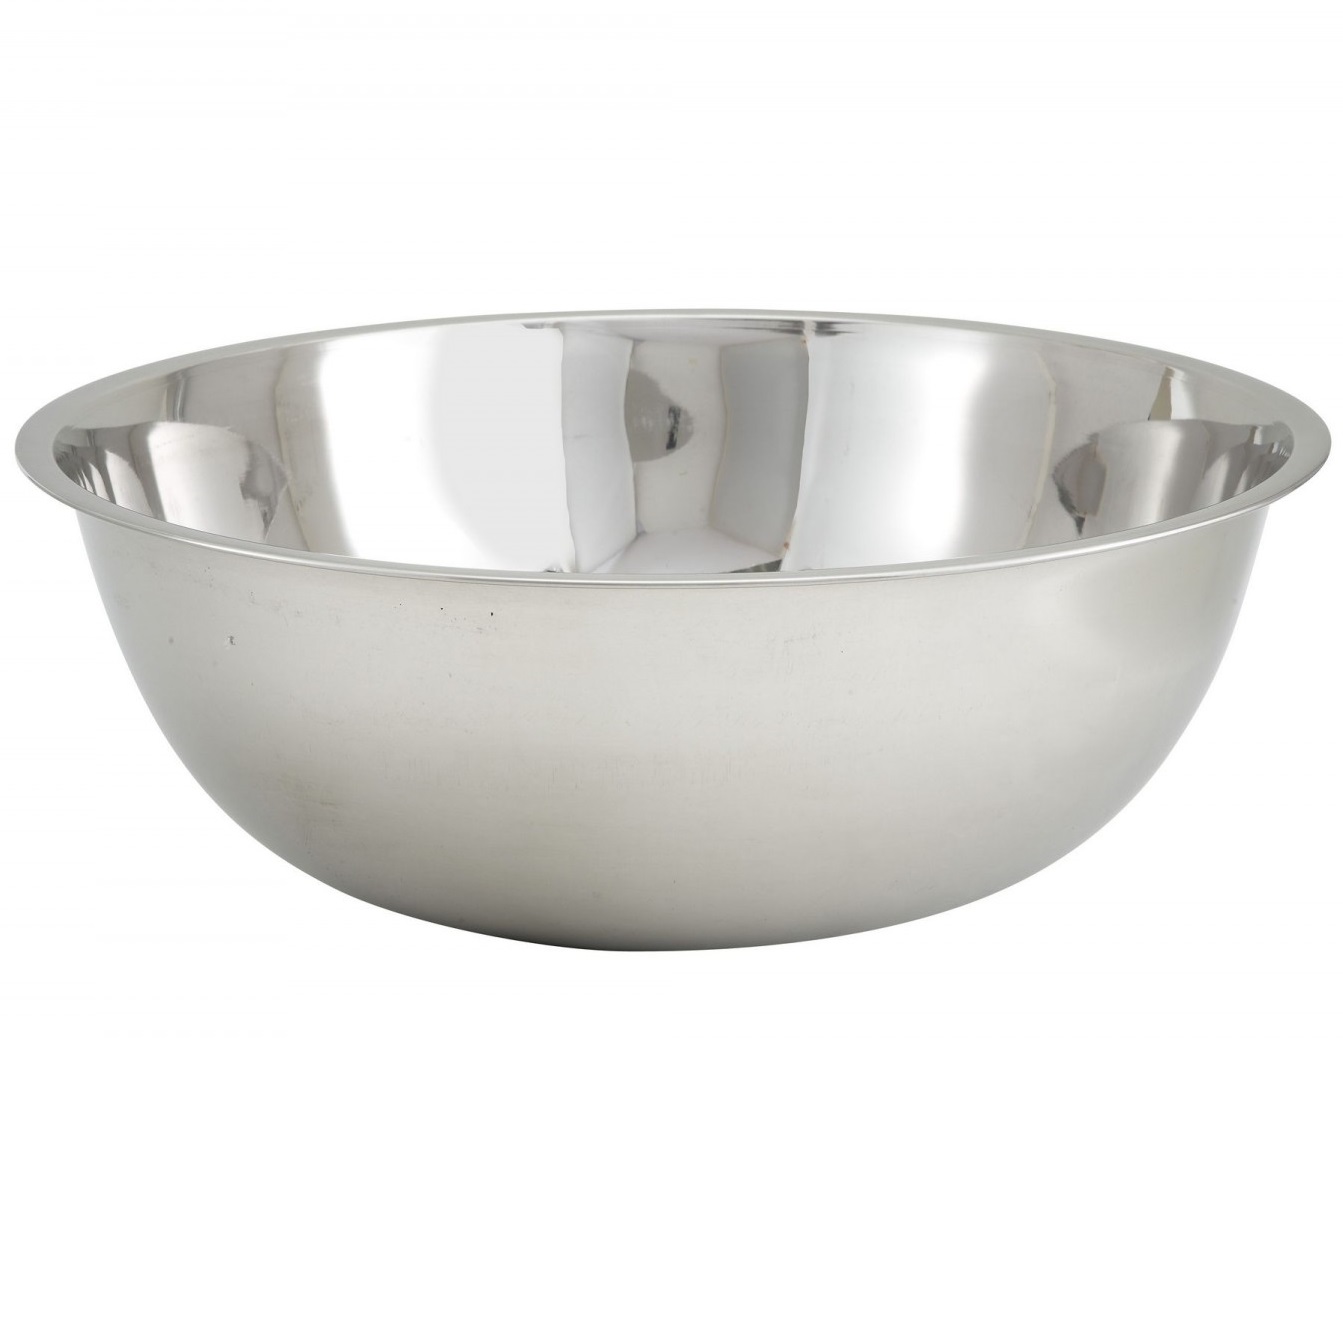 30qt STAINLESS STEEL MIXING
BOWL (EA)